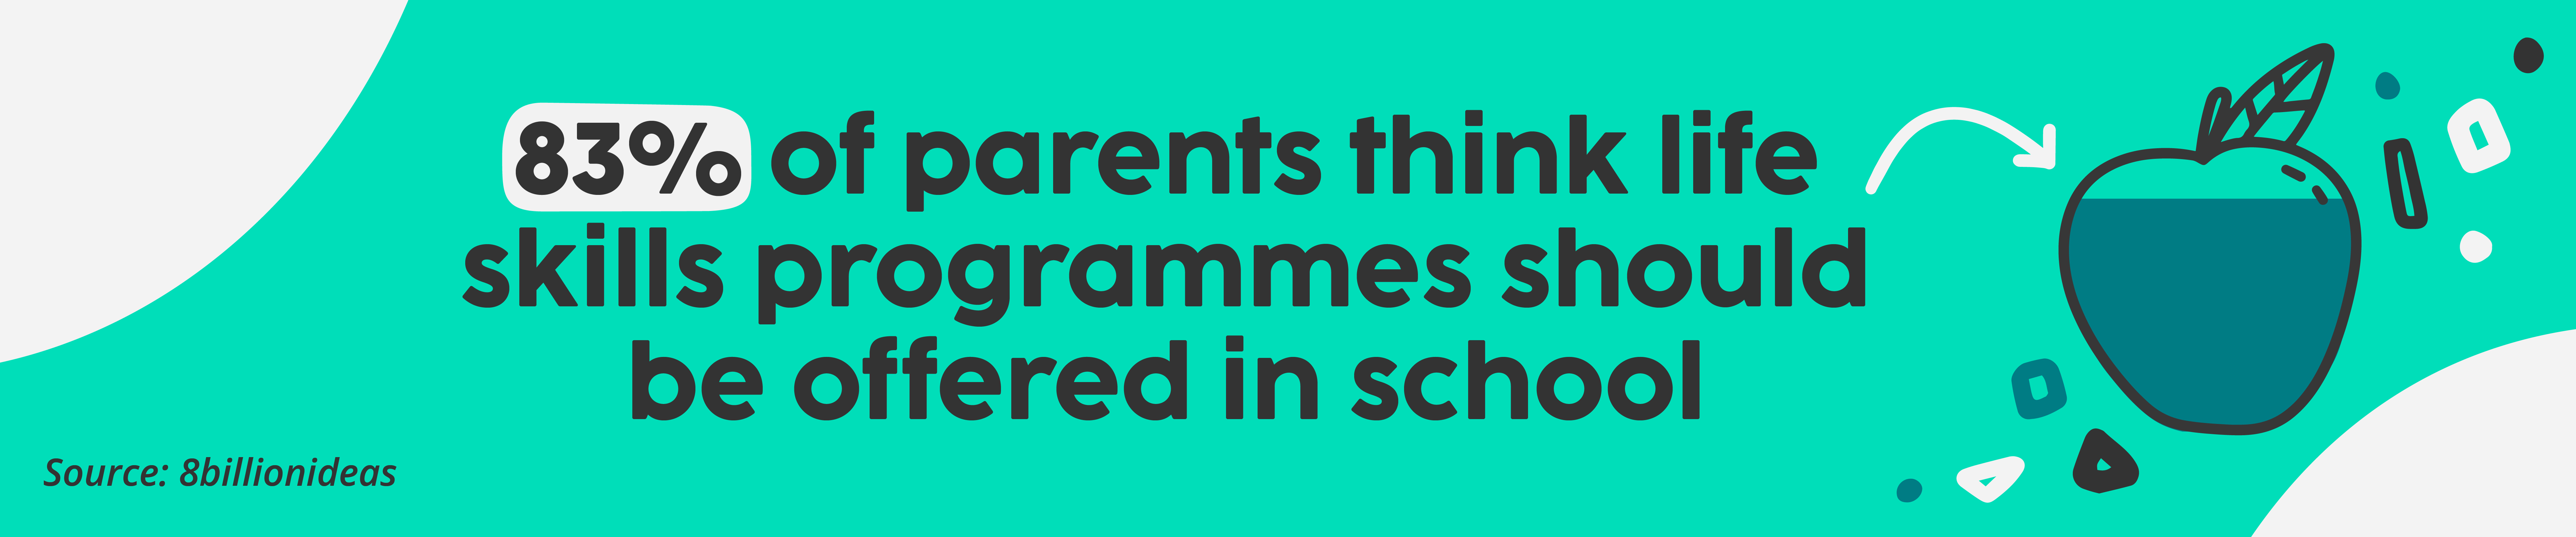 83% of parents think life skills programmes should be taught in schools